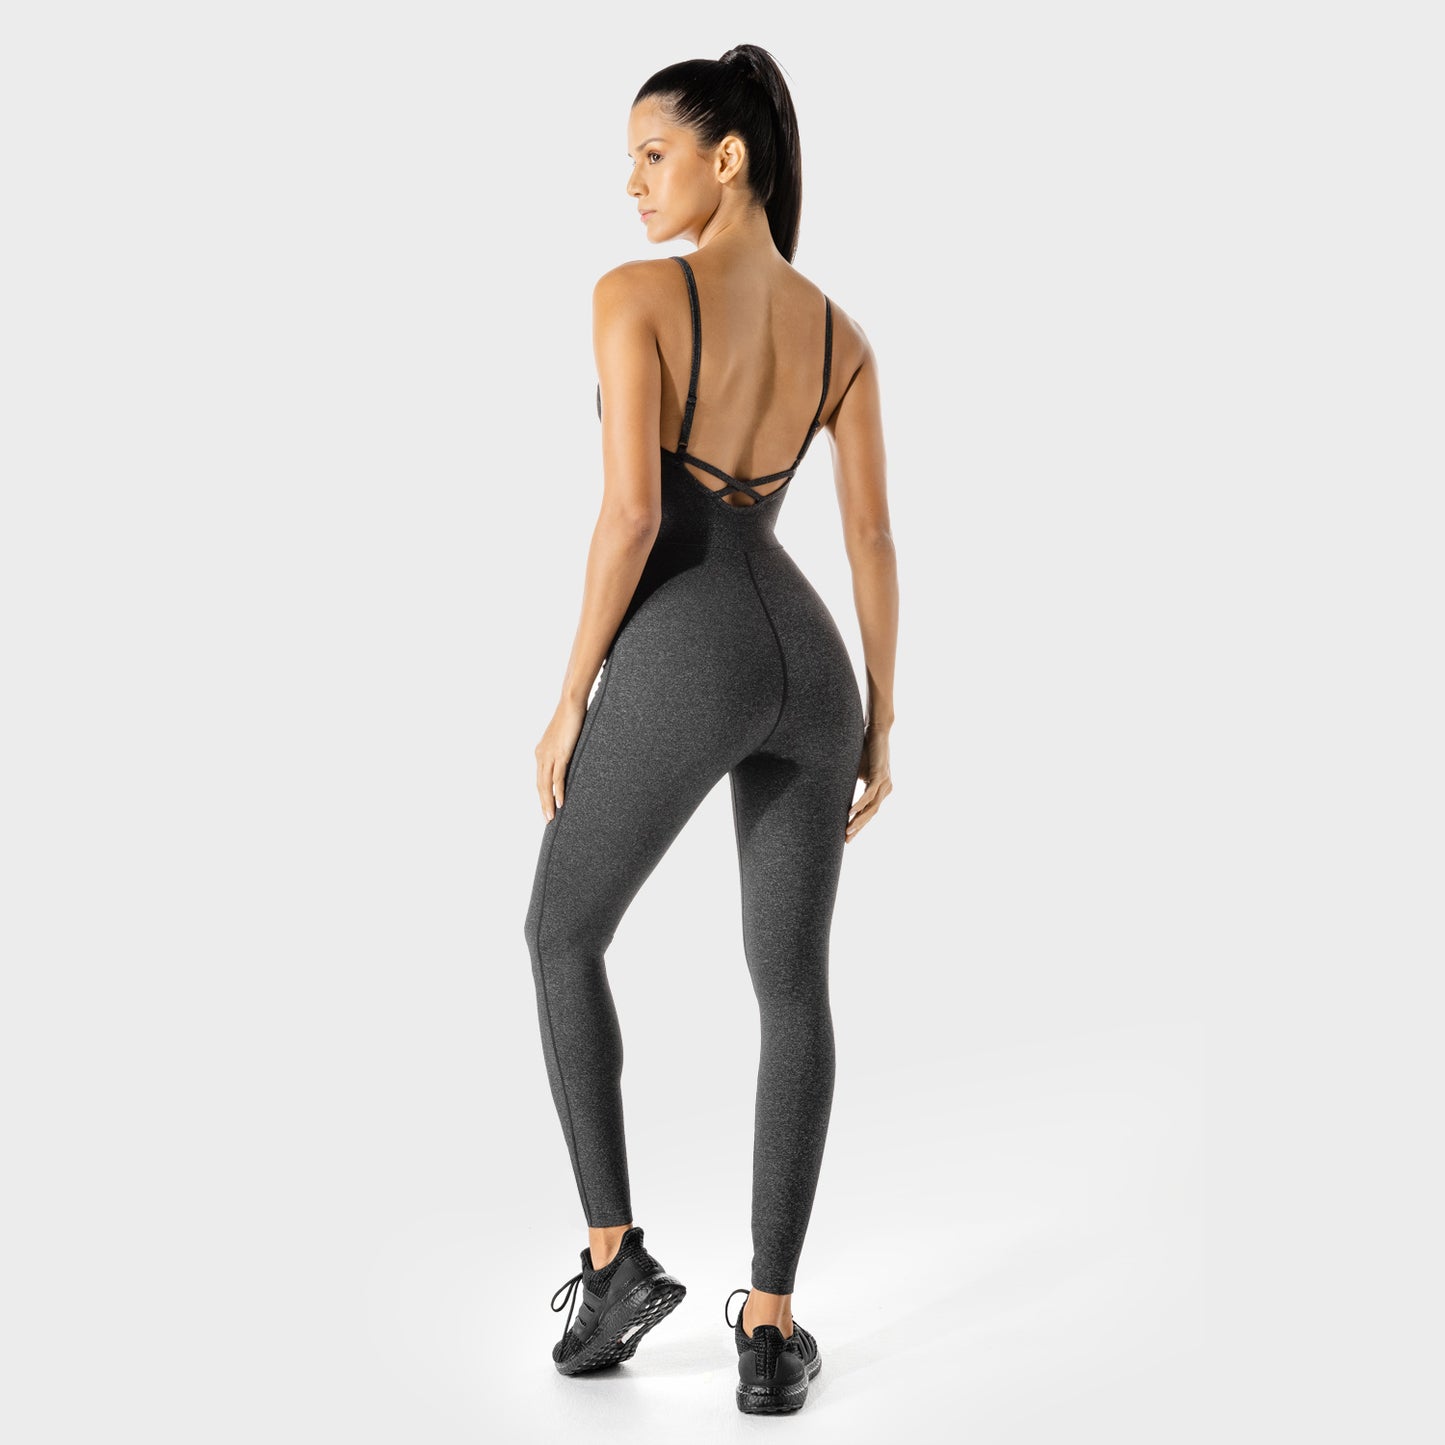 squatwolf-gym-wear-womens-fitness-performance-catsuit-black-workout-tops